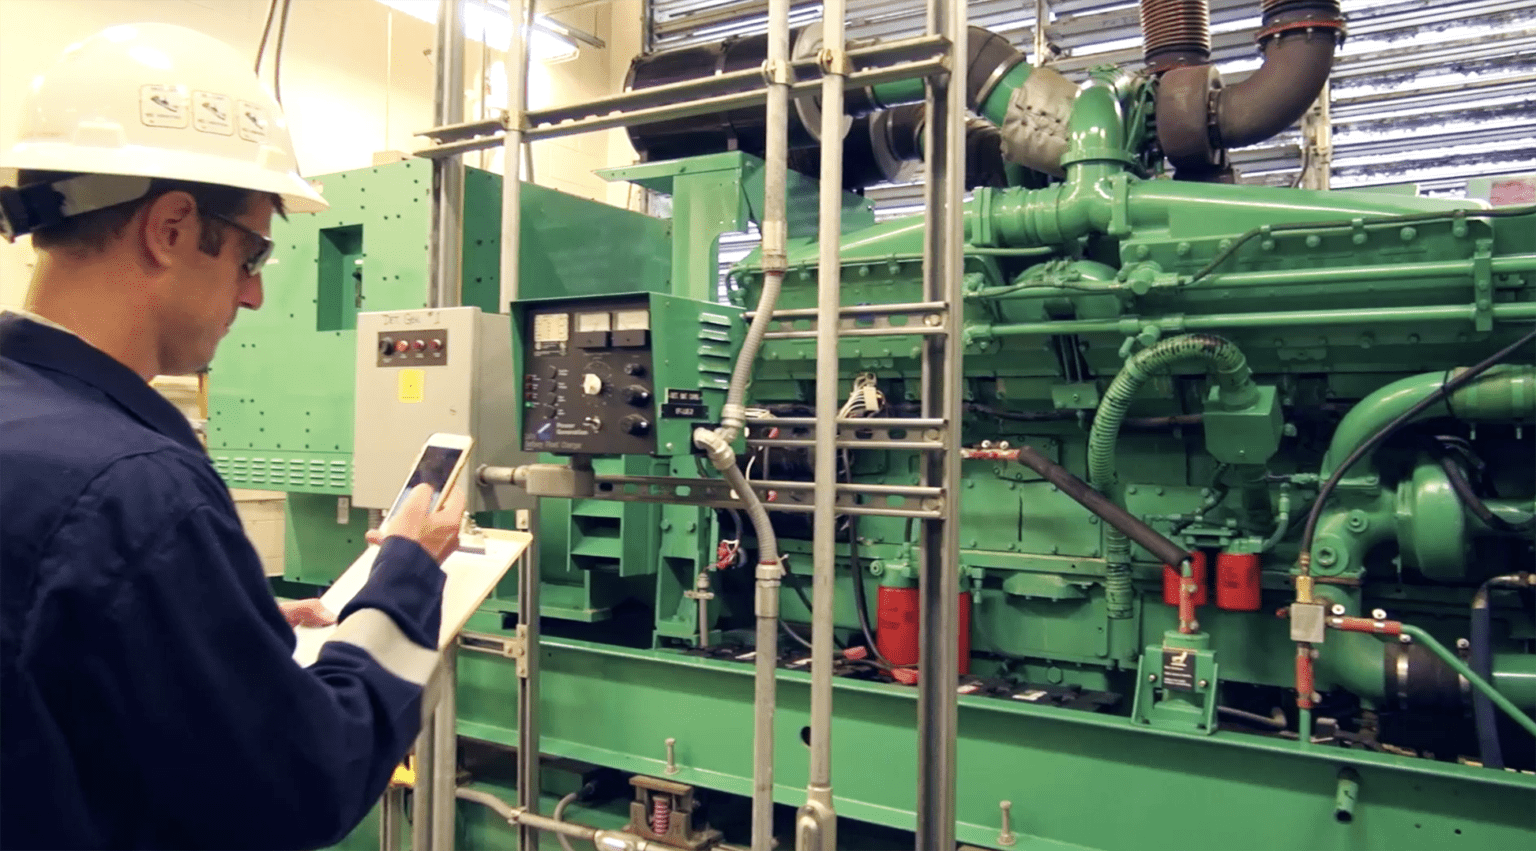 guy looking at industrial machinery, part of a series on hyper local connectivity